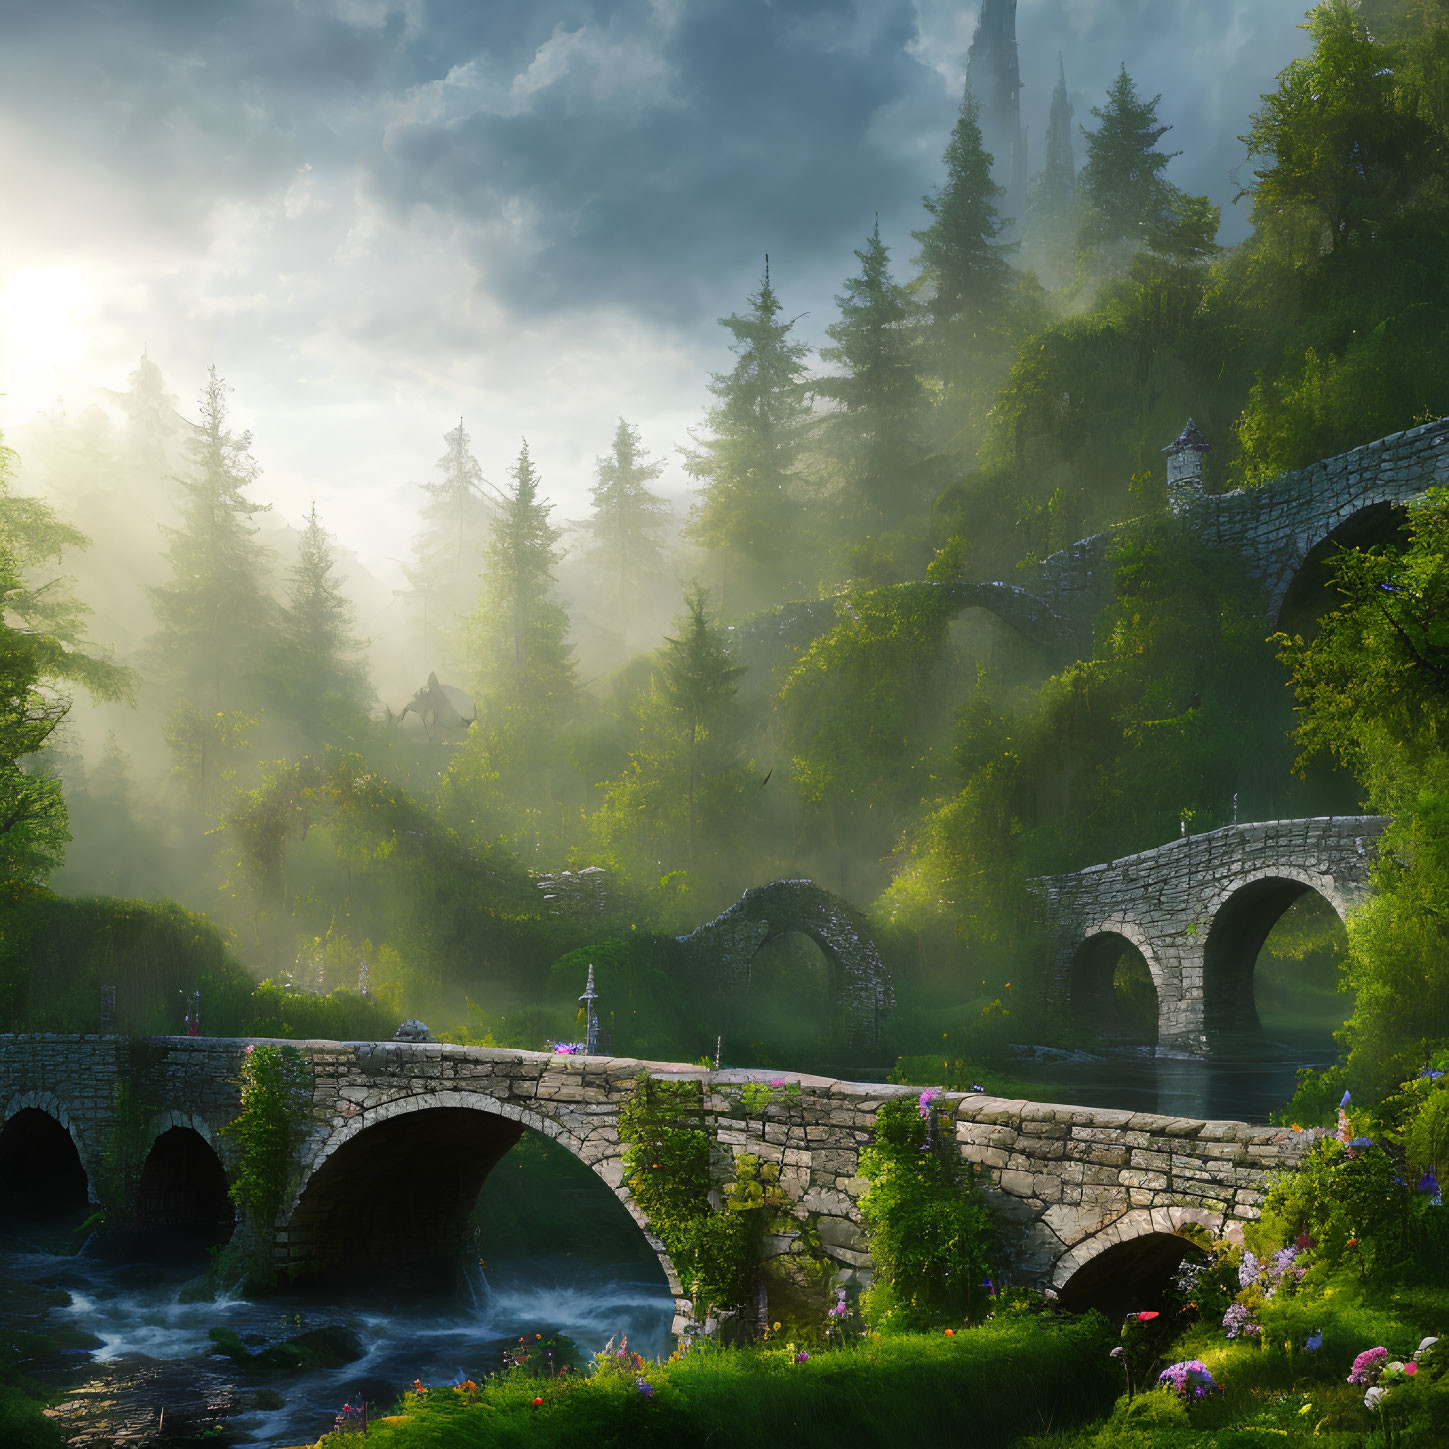 Sunlit mist over serene river and ancient stone bridges in lush forest.